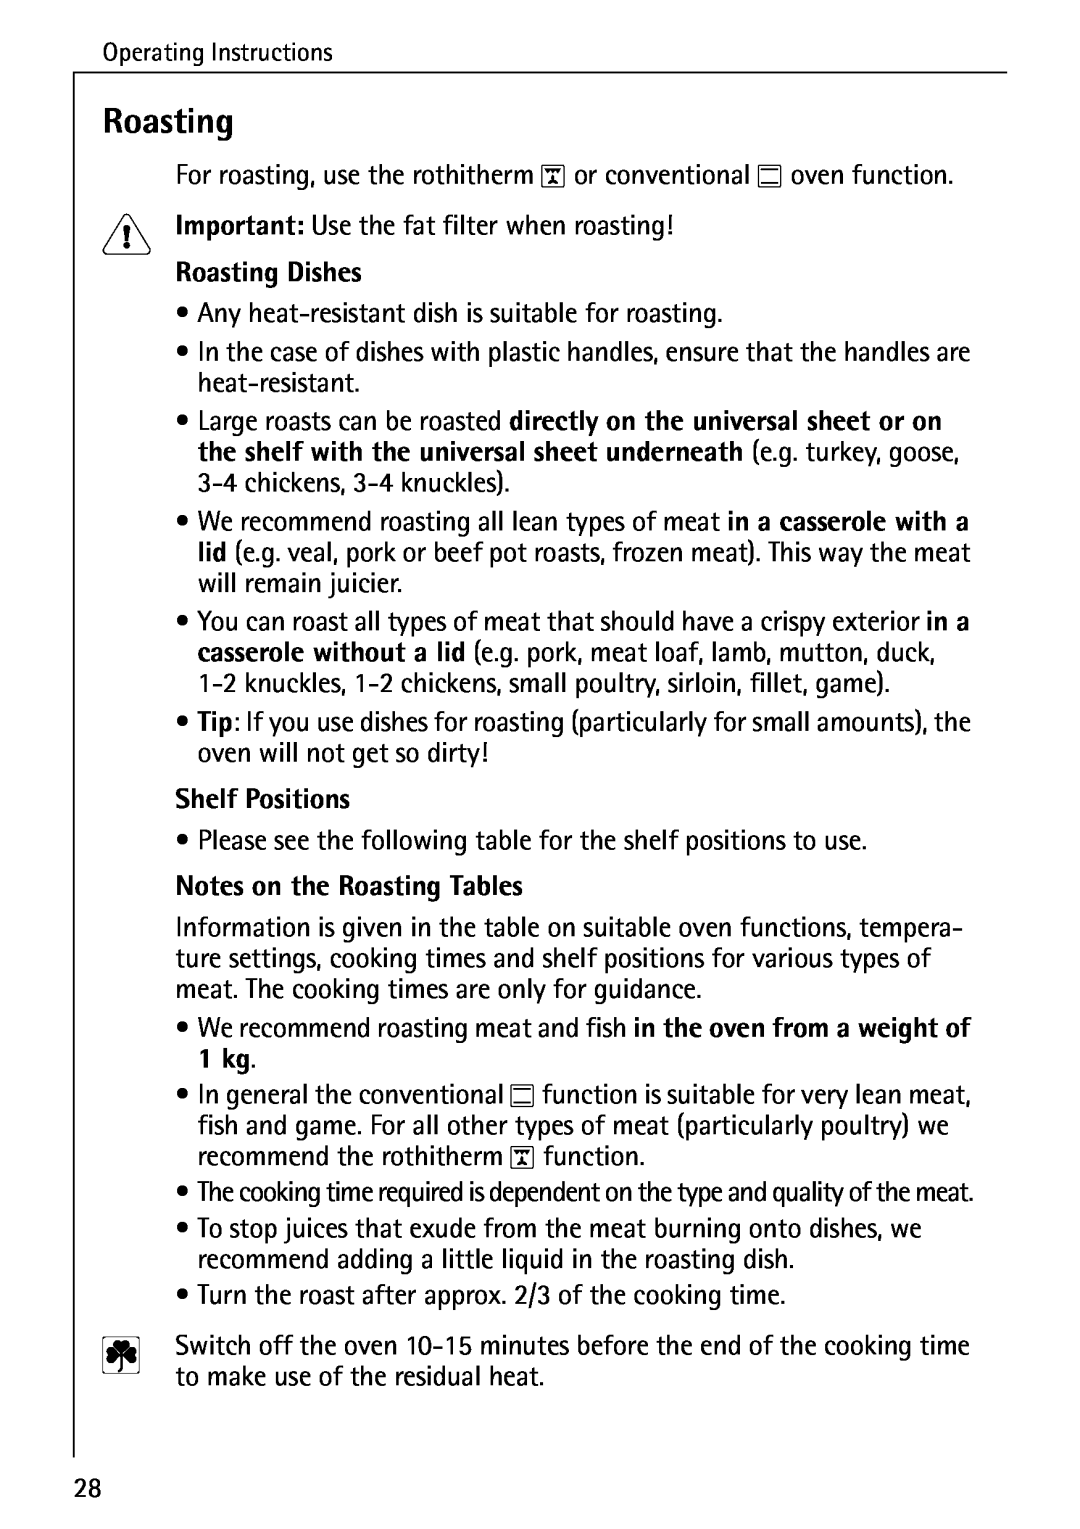 AEG 5033 V operating instructions Roasting Dishes, Notes on the Roasting Tables, Shelf Positions 